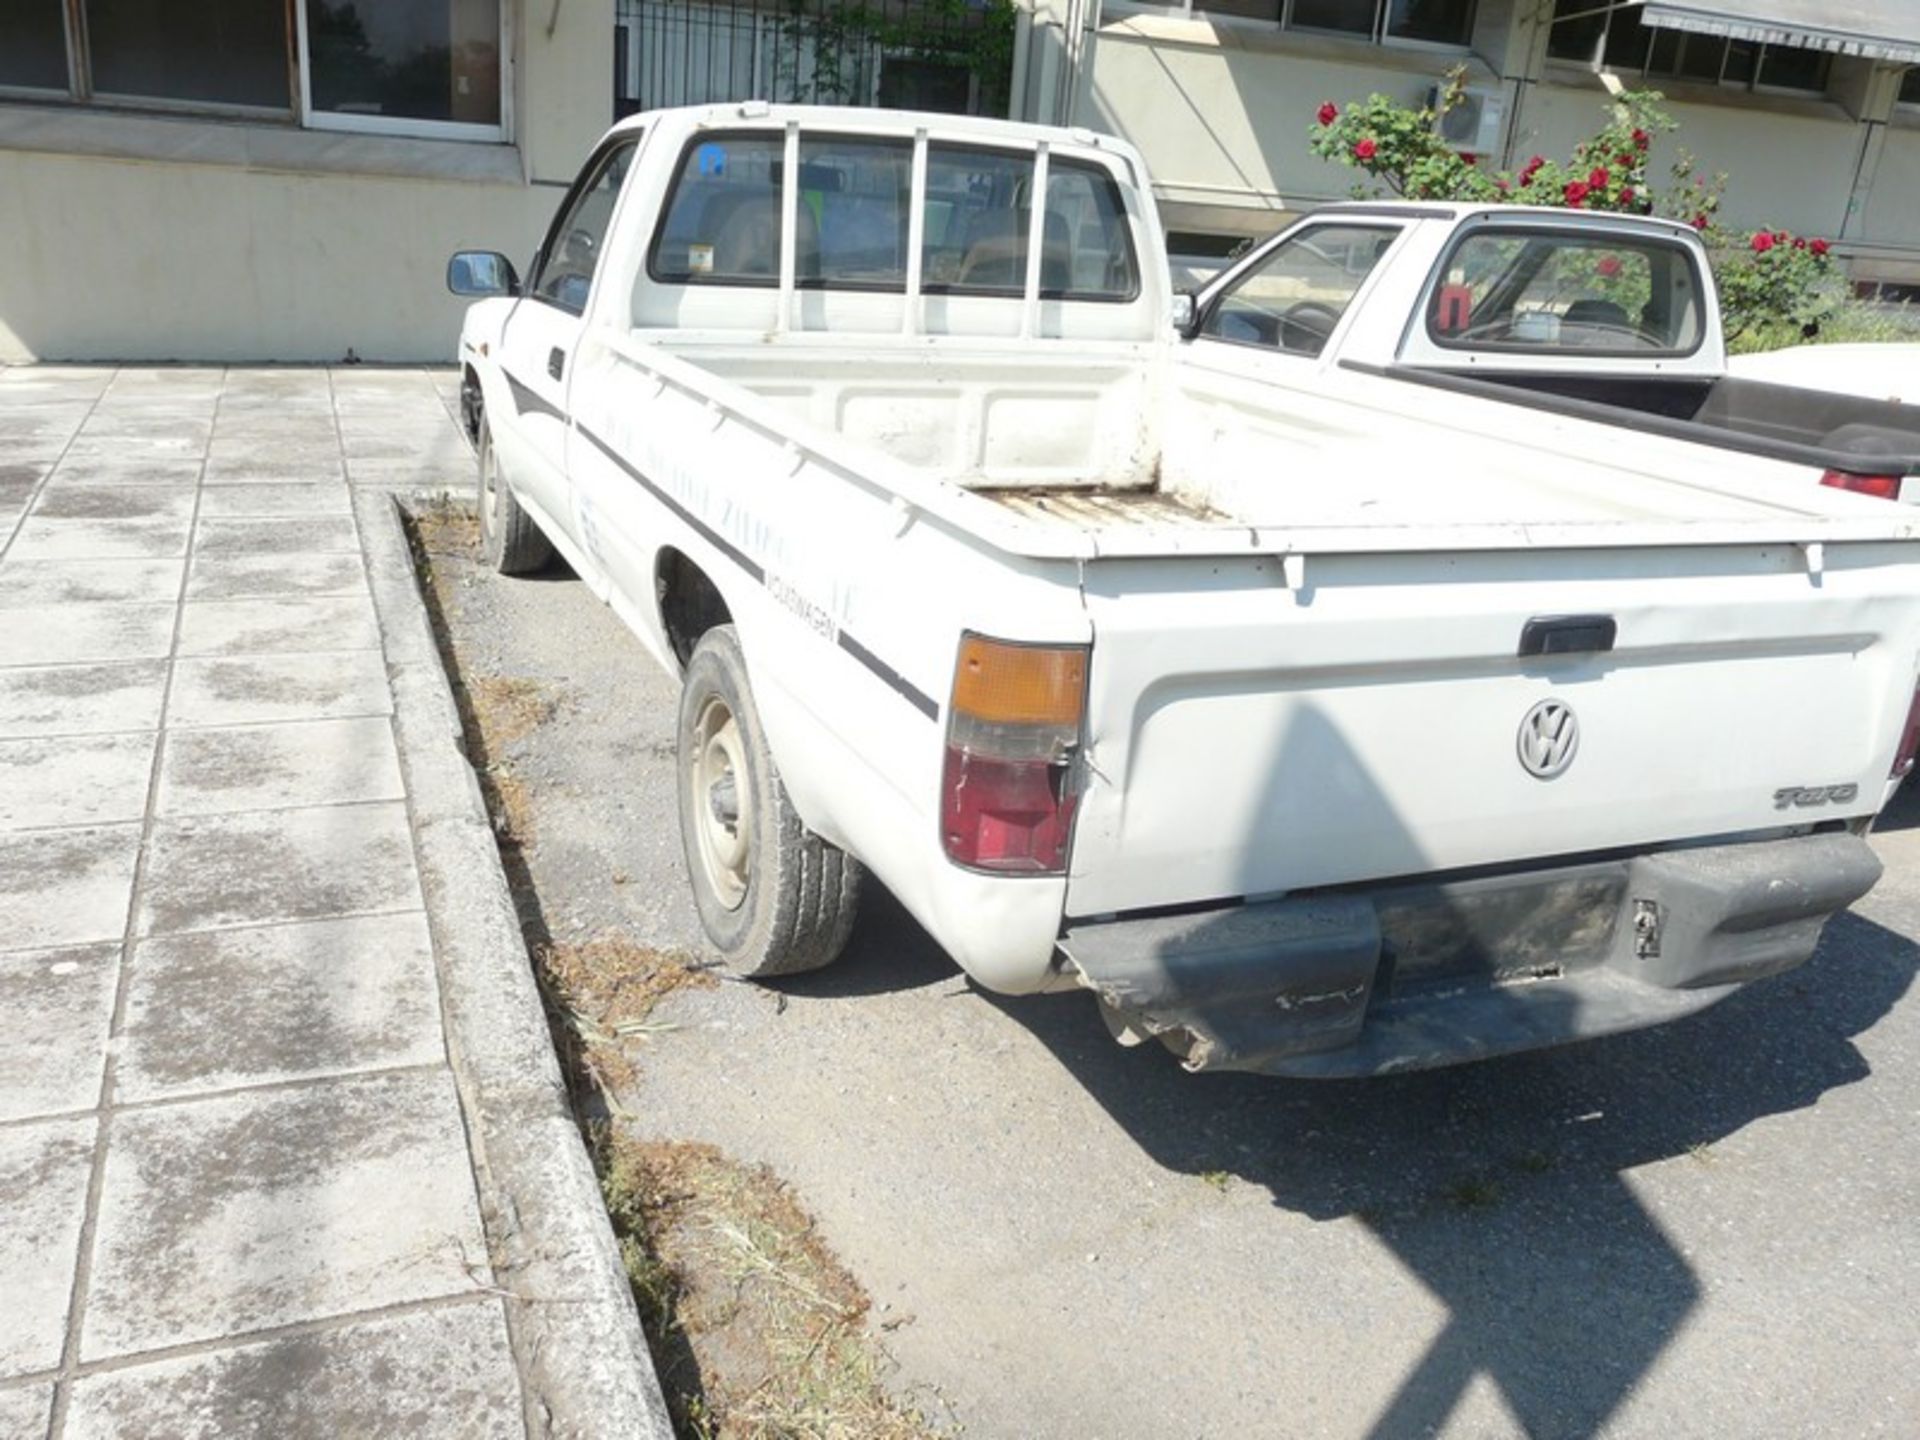 WV TARO REG NBY 4244 ,2.4 DIESEL ,KM 188583,Pick Up Truck ,2 Doors, Service Book Available , Year: - Image 8 of 15